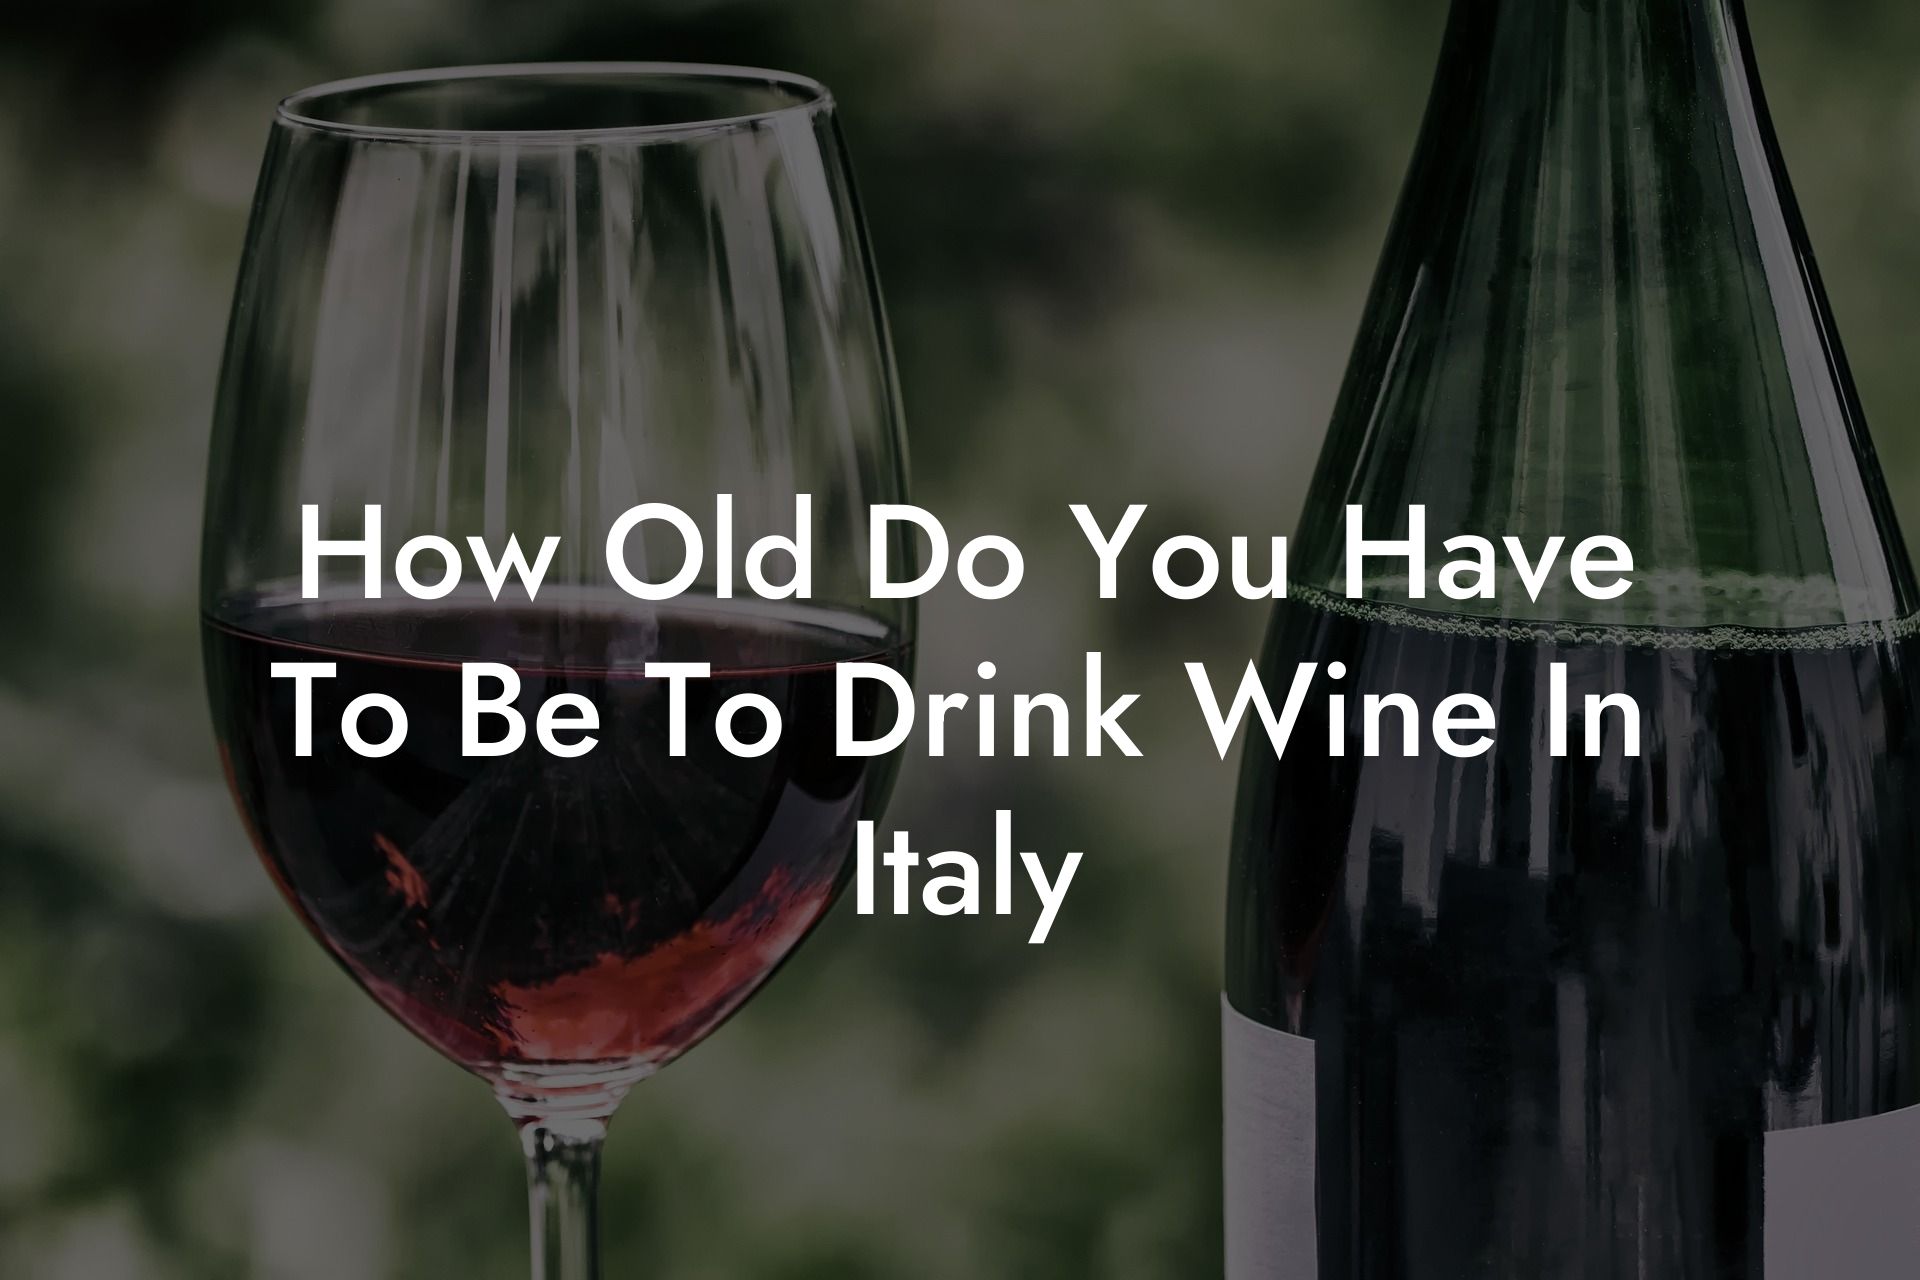 How Old Do You Have To Be To Drink Wine In Italy